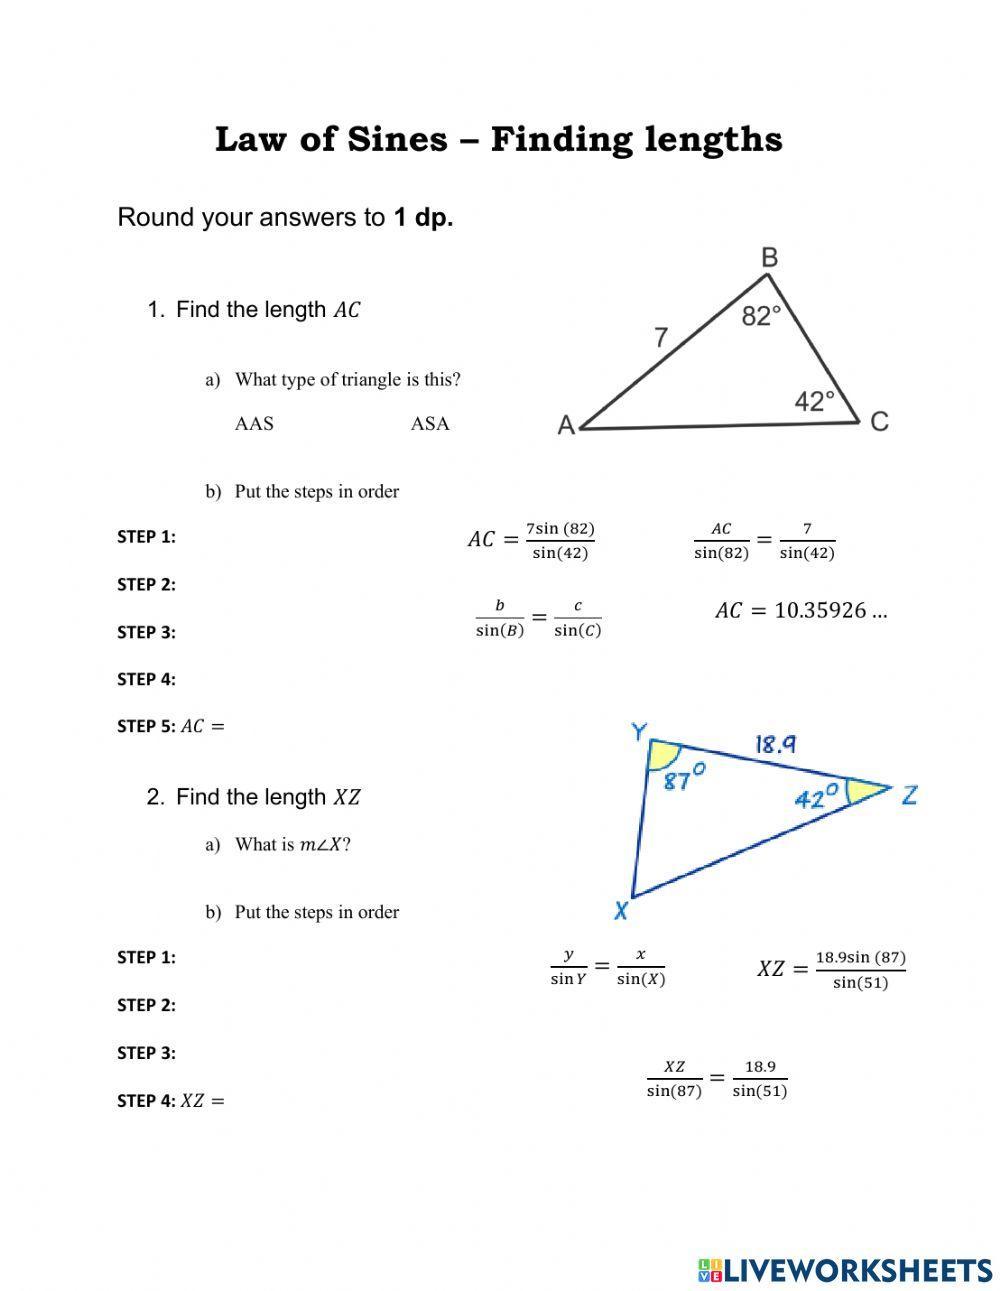 Law of Sines - finding lengths